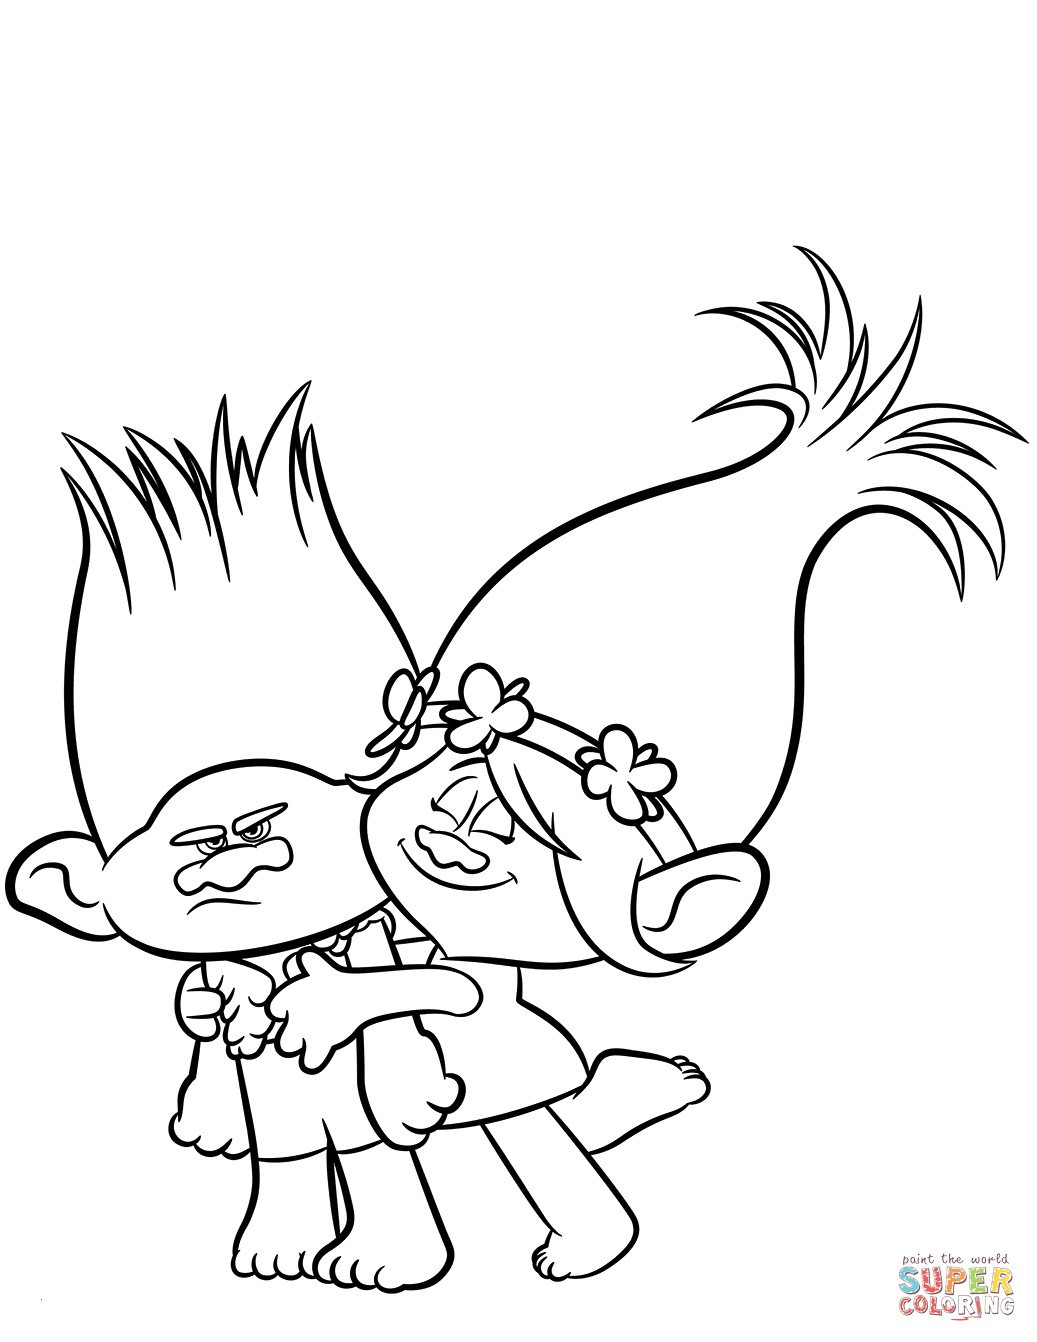 Branch Trolls Coloring Pages attractive Sturdy Poppy Colouring Page Branch From Trolls 968 Unknown for